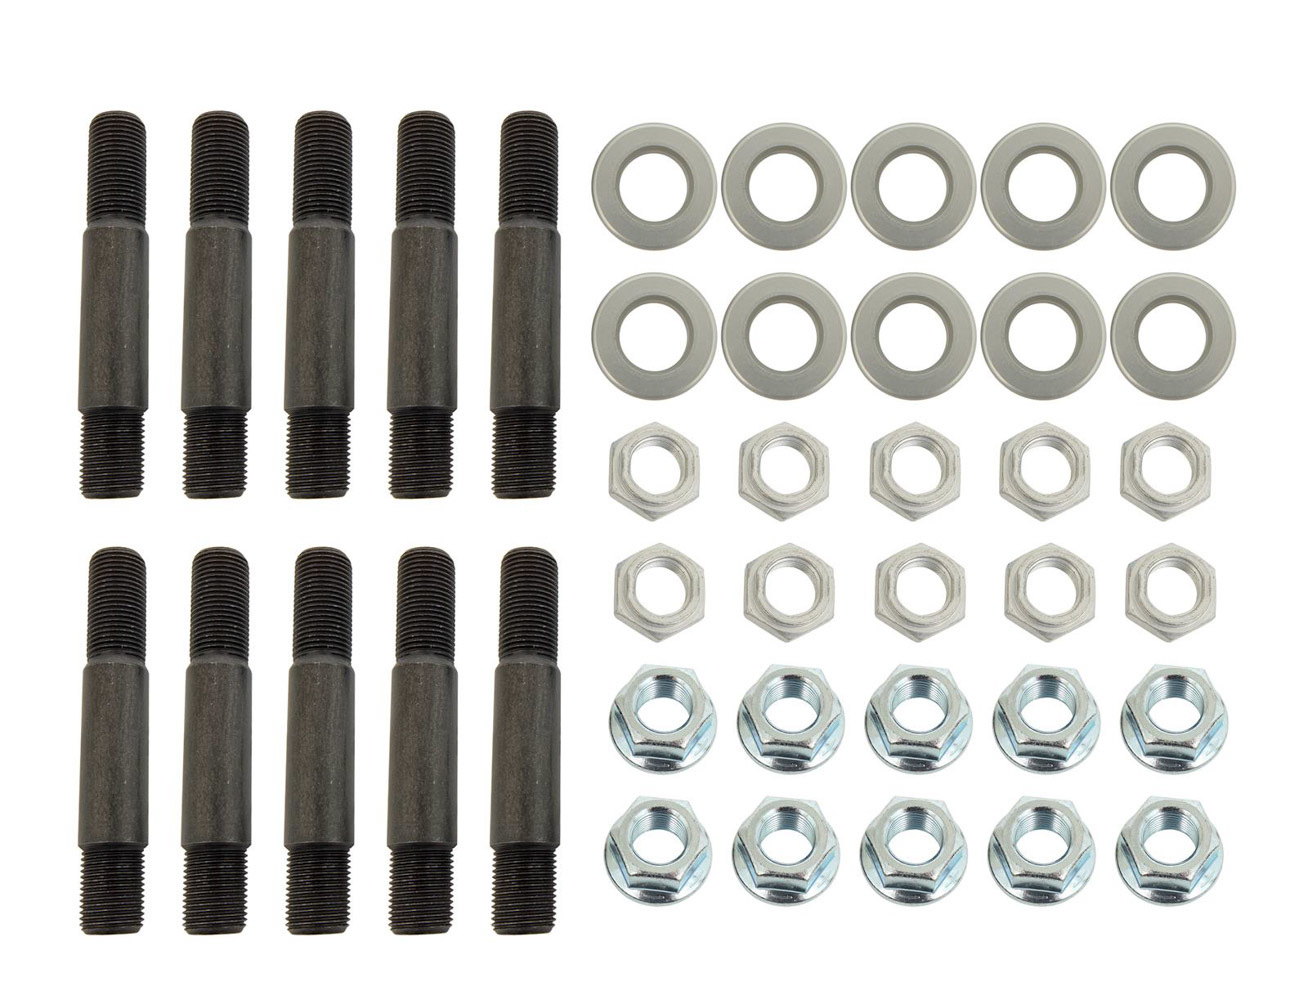 Strange Engineering A1041 Wheel Stud, 5/8-18 in Thread, 4.000 in Long, Bolt-On, Locking Nuts / Lug Nuts / Washers Included, Strange Axles, Kit